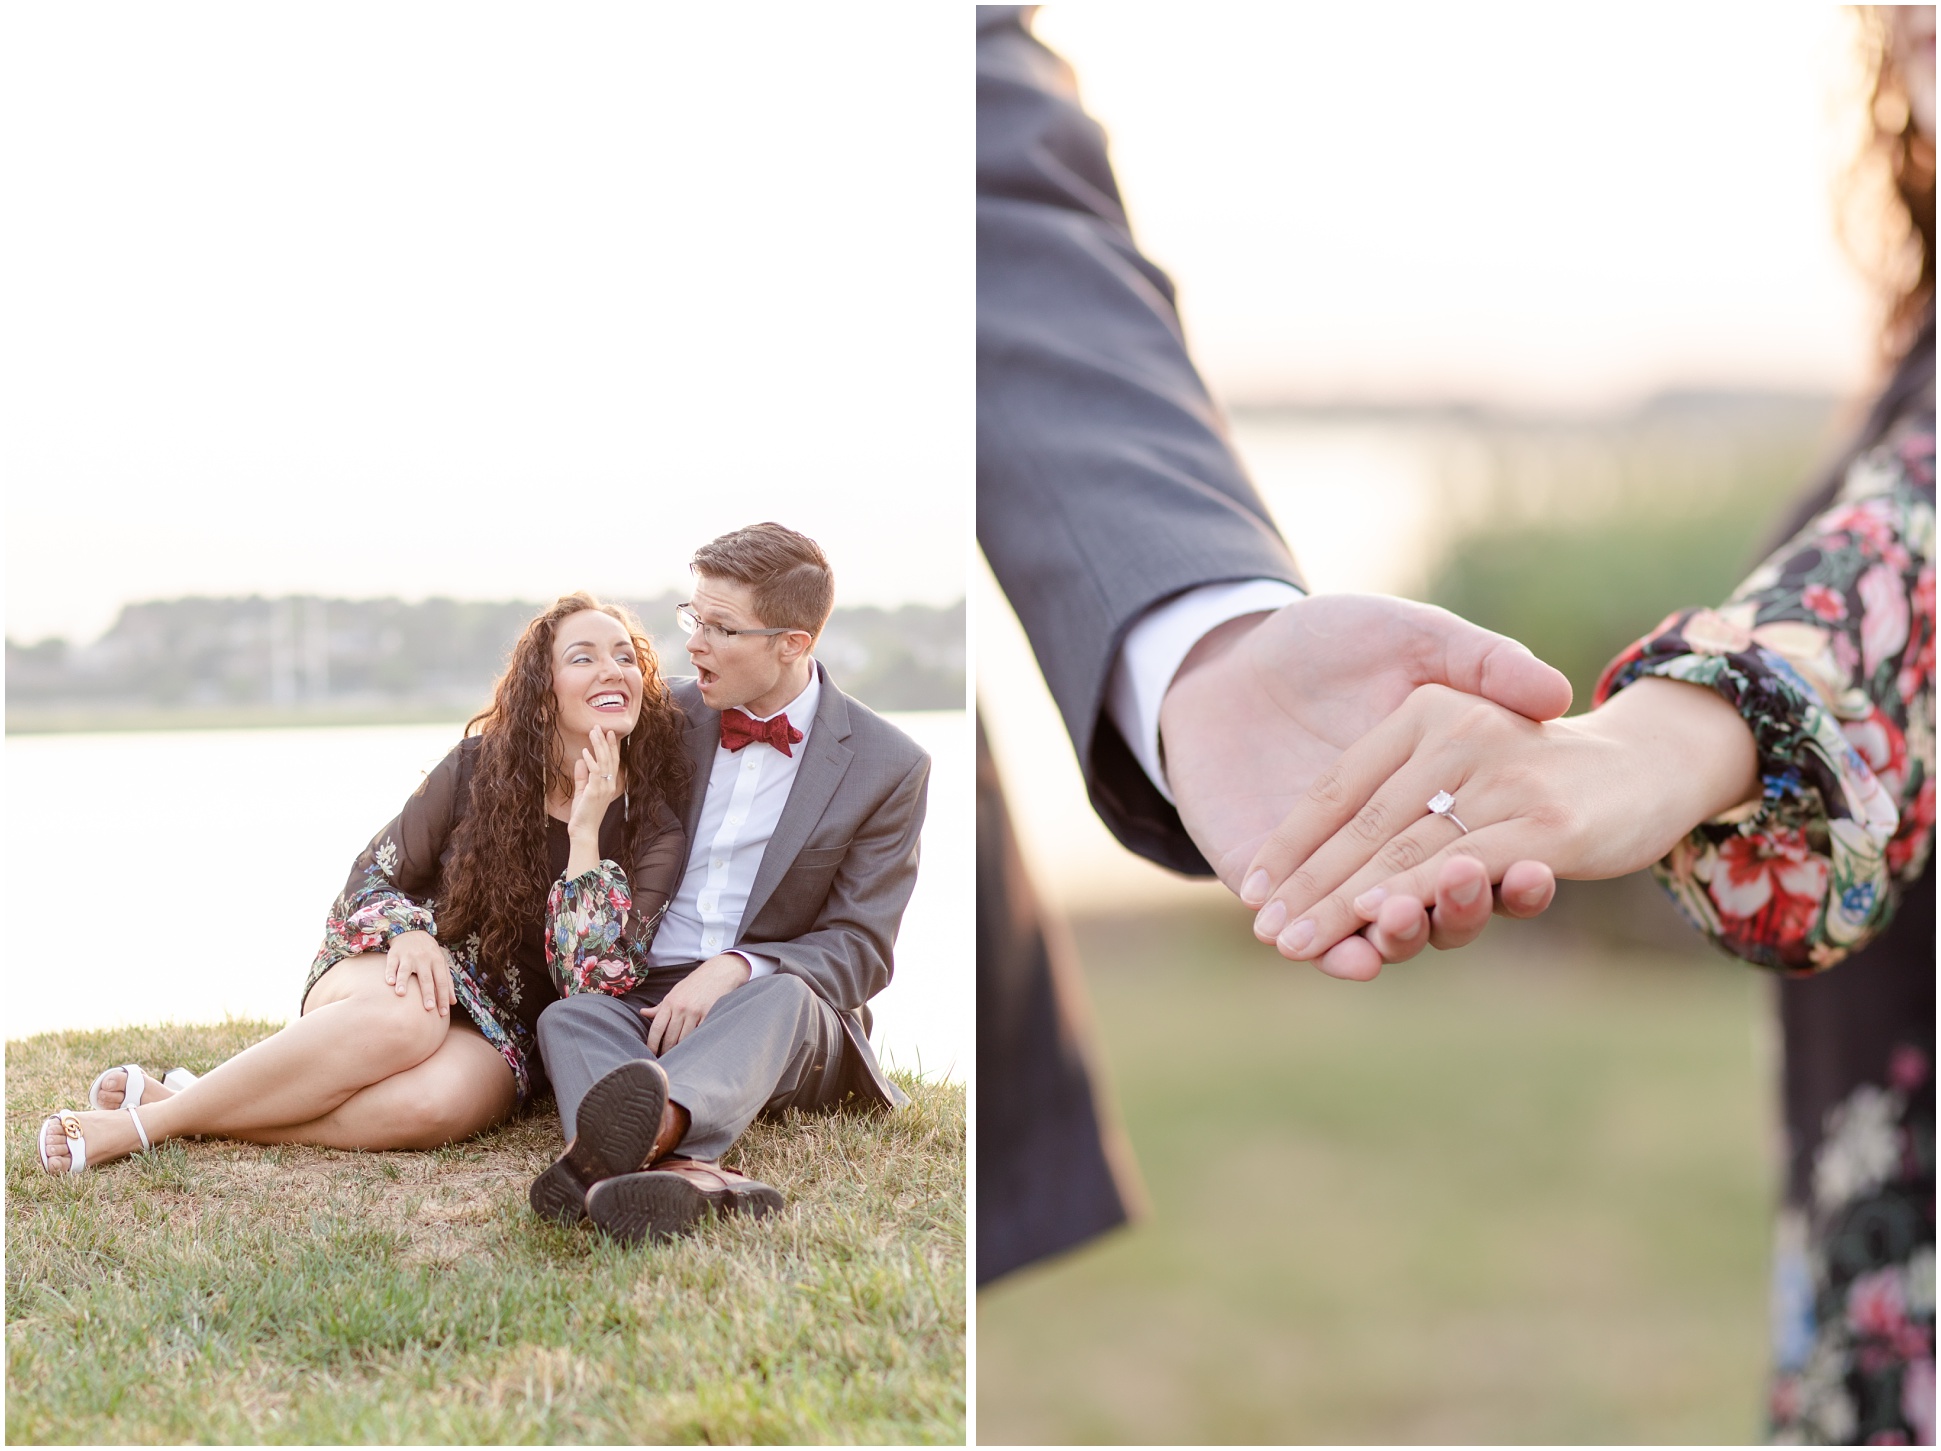 Couple snuggled up in formal attire by the water, right image: holding hands